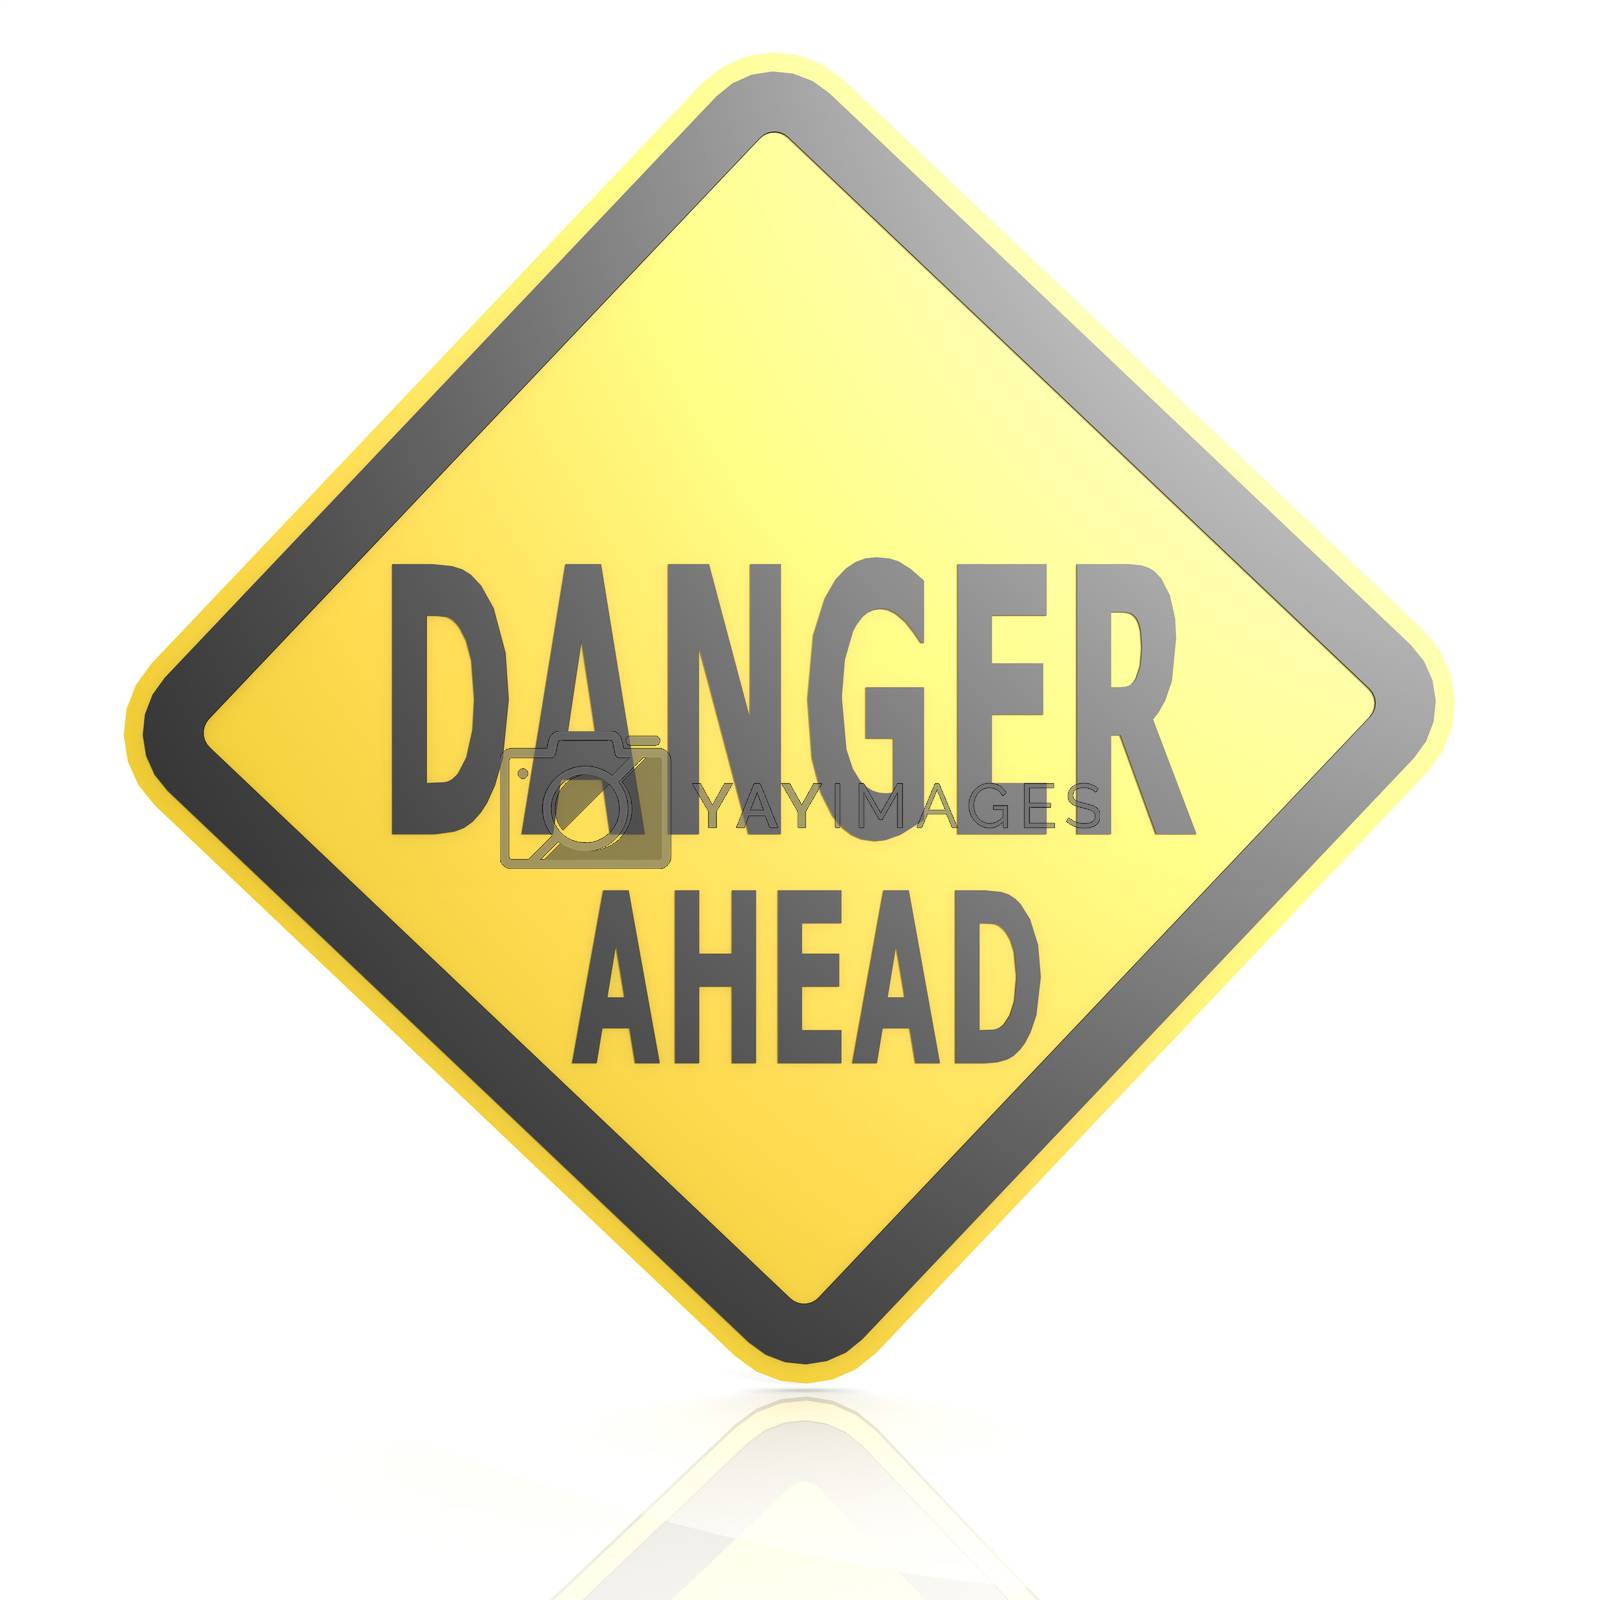 Royalty free image of Danger ahead road sign by tang90246